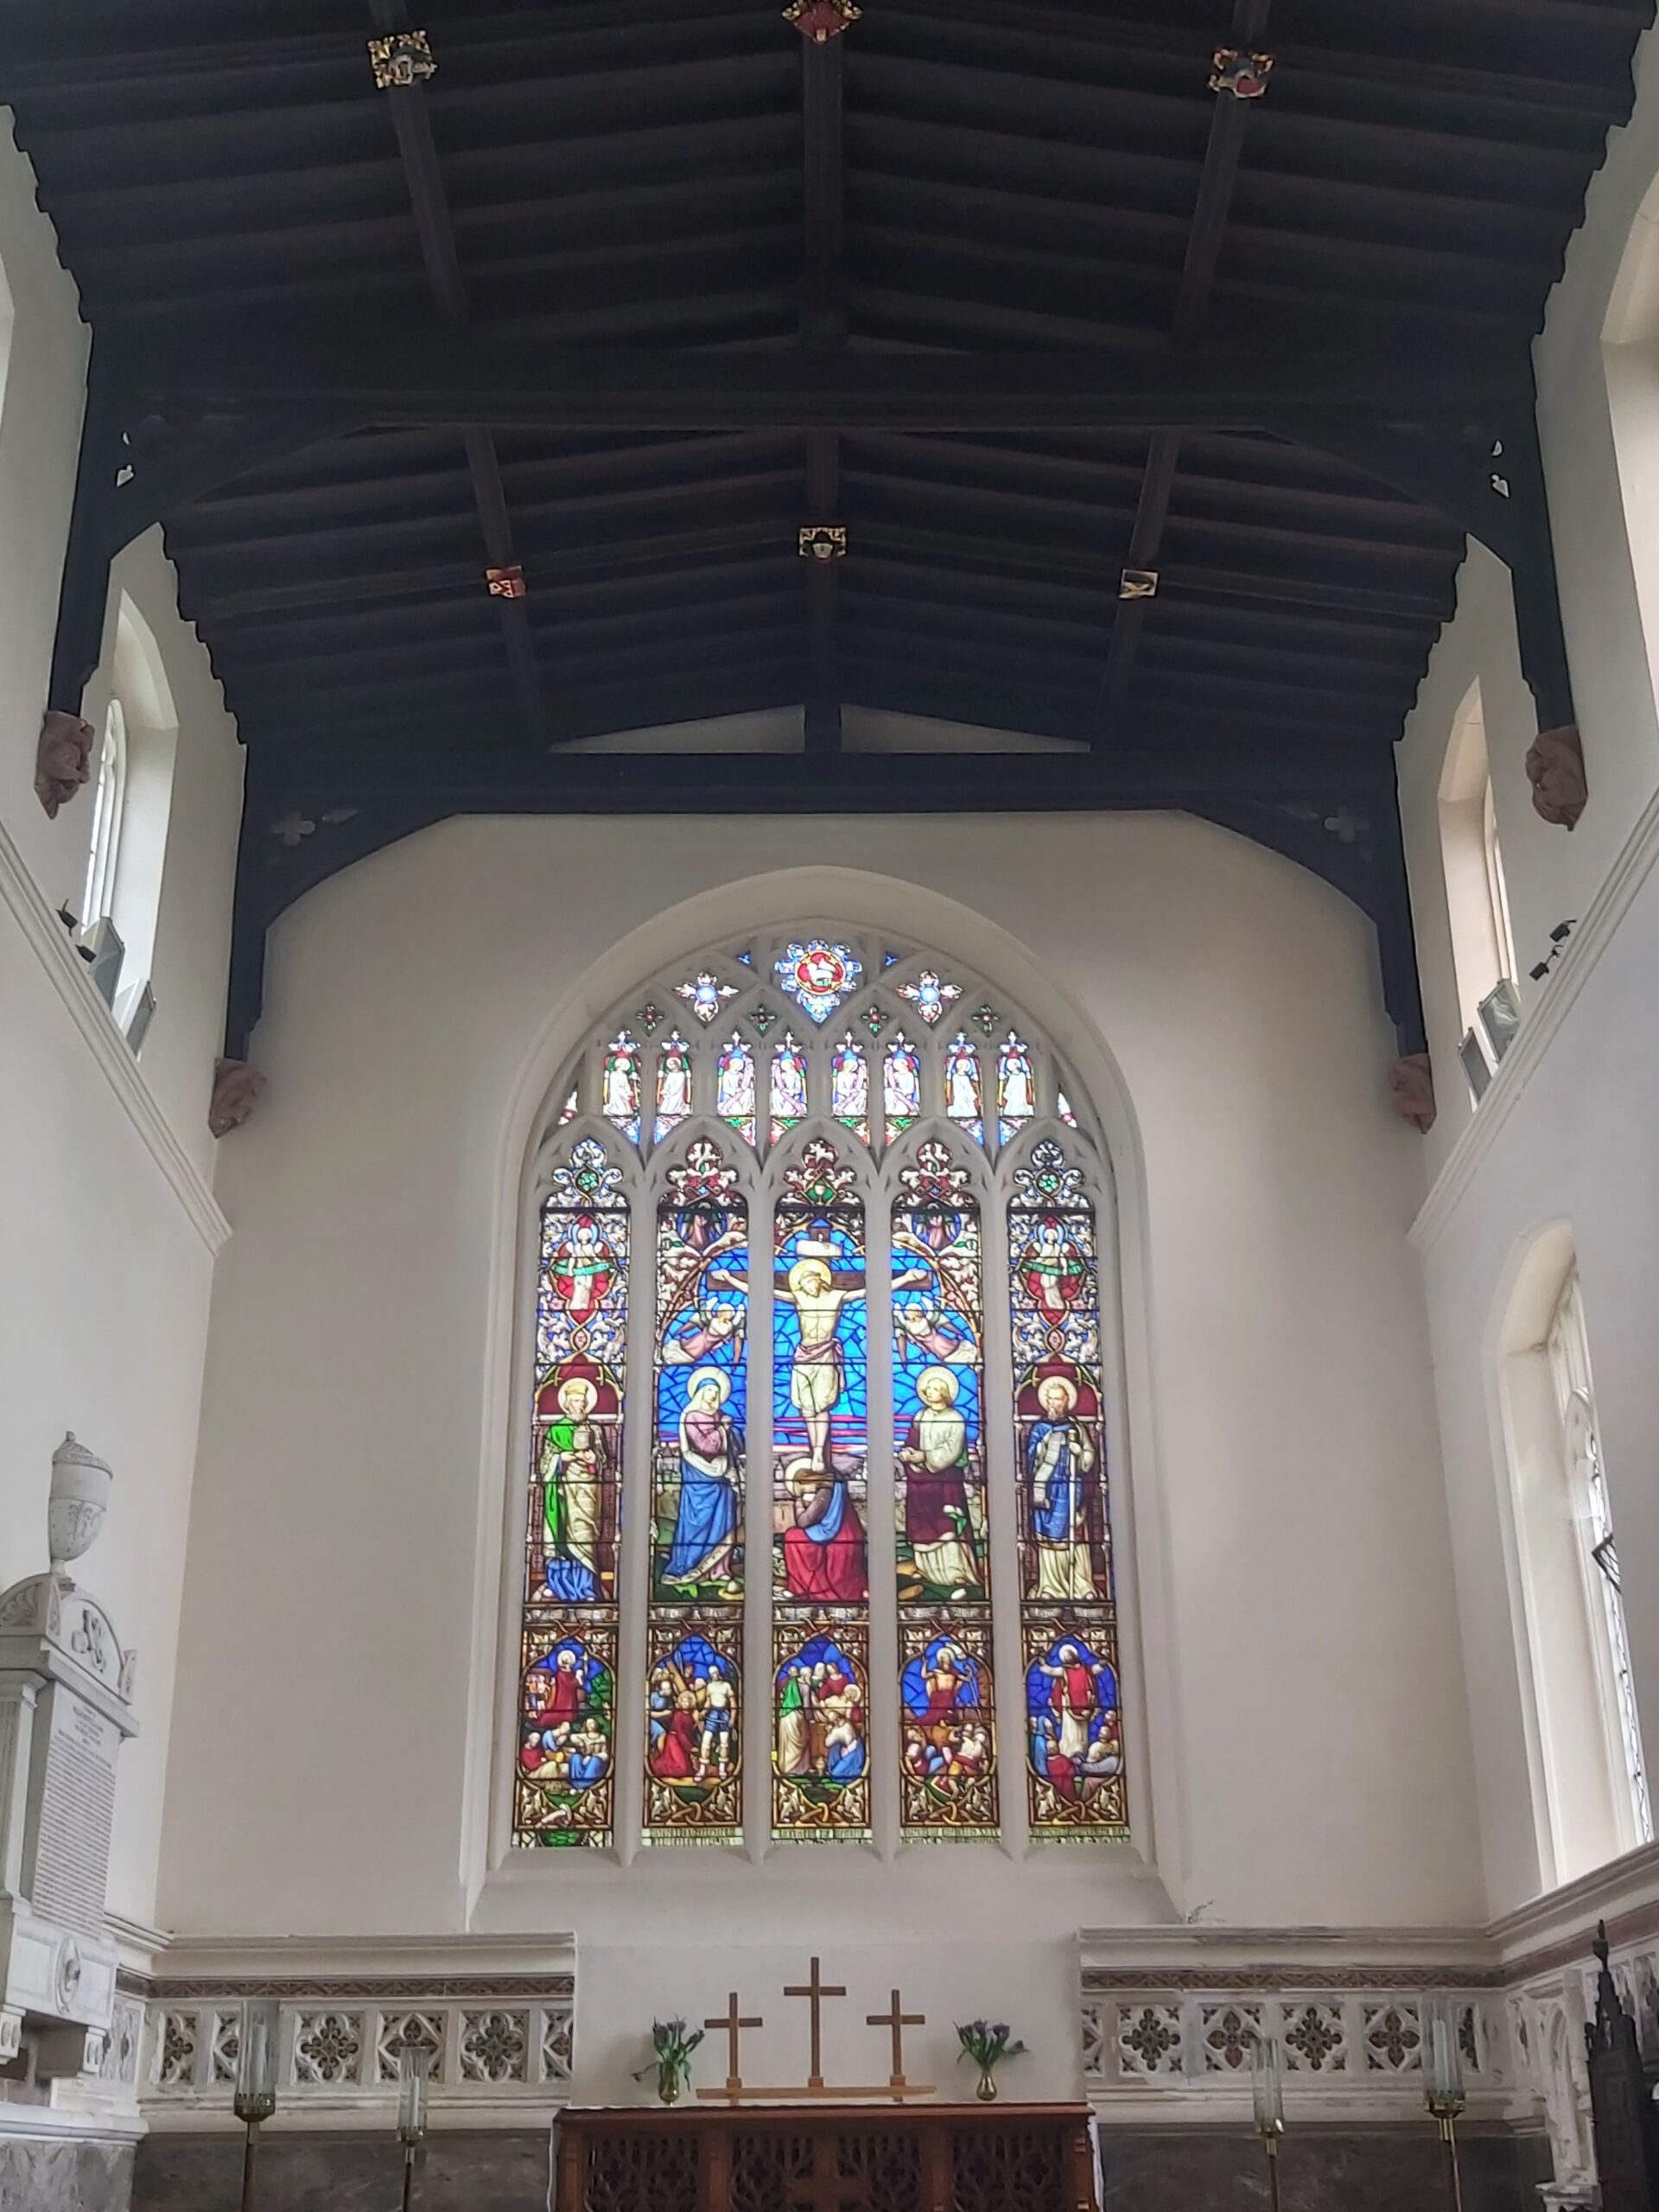 A large stained glass window depicting Christ on the cross in St Mary's Church, Ware, England